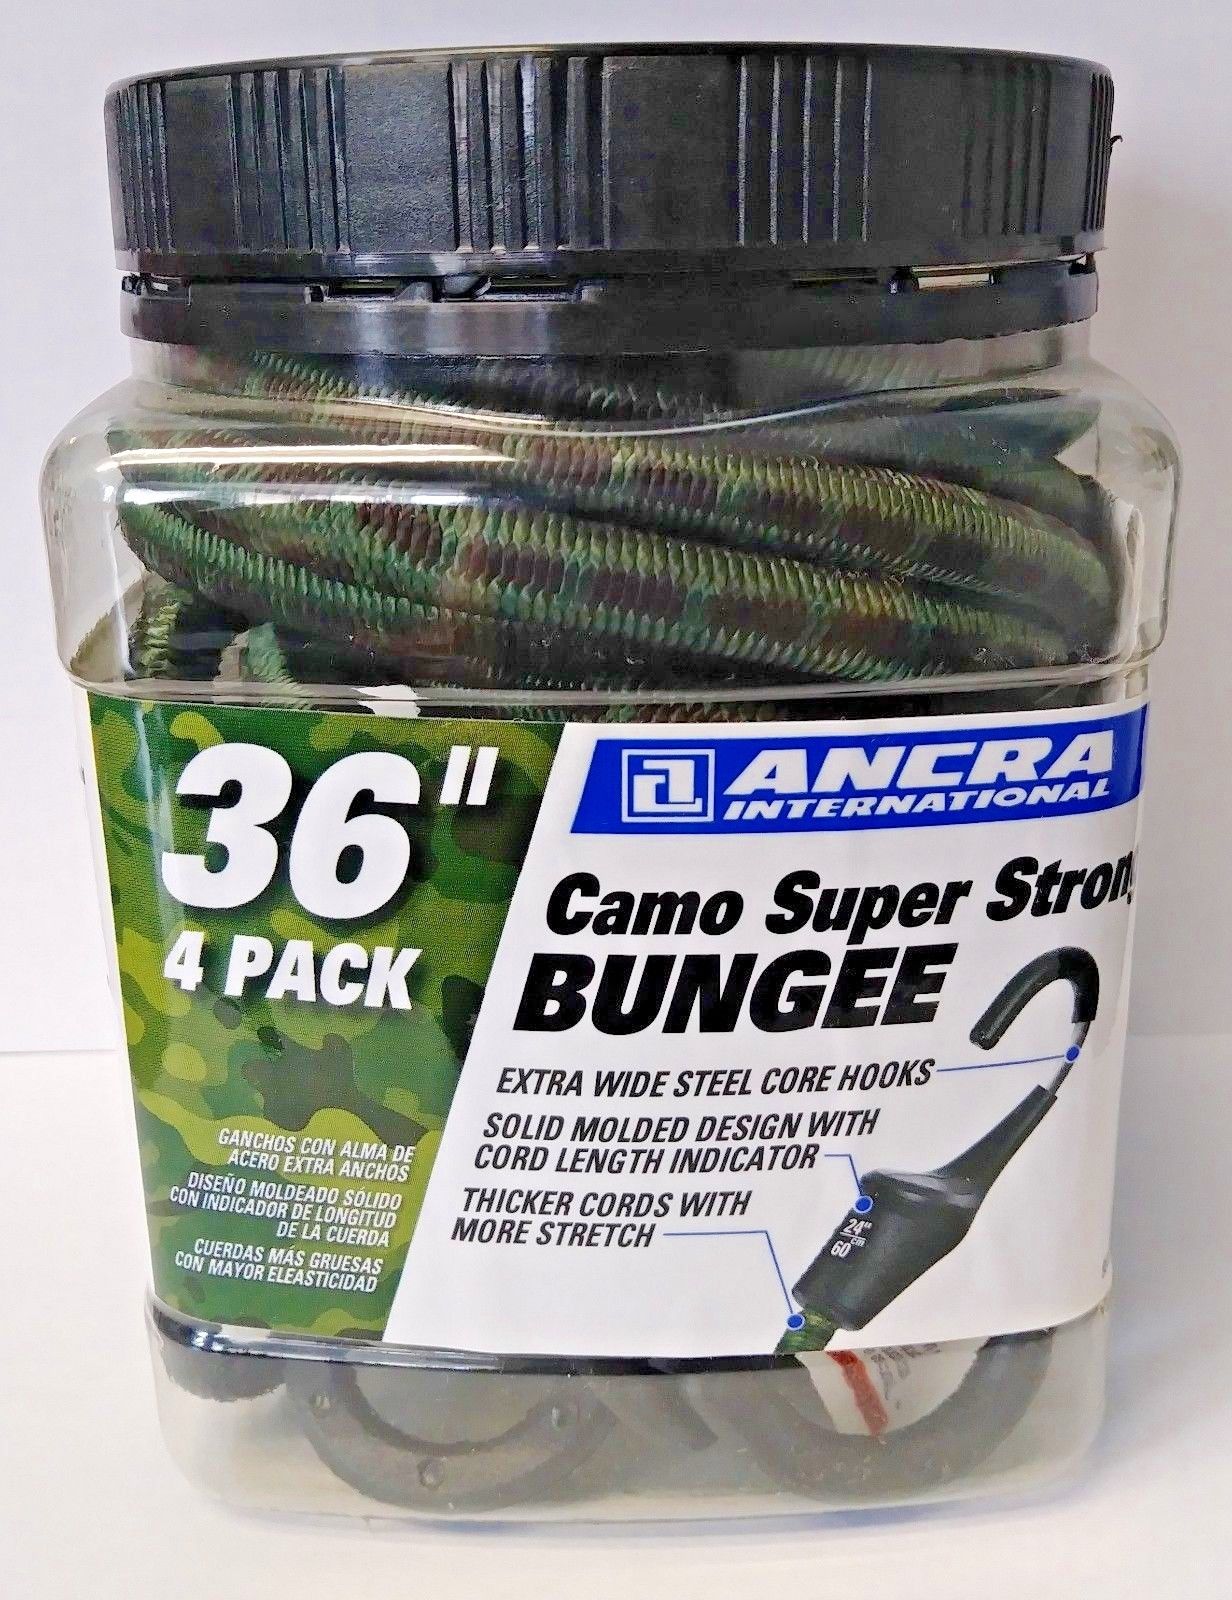 Ancra 95730 36" Camo Super Strong Bungee Cords 4 Pack